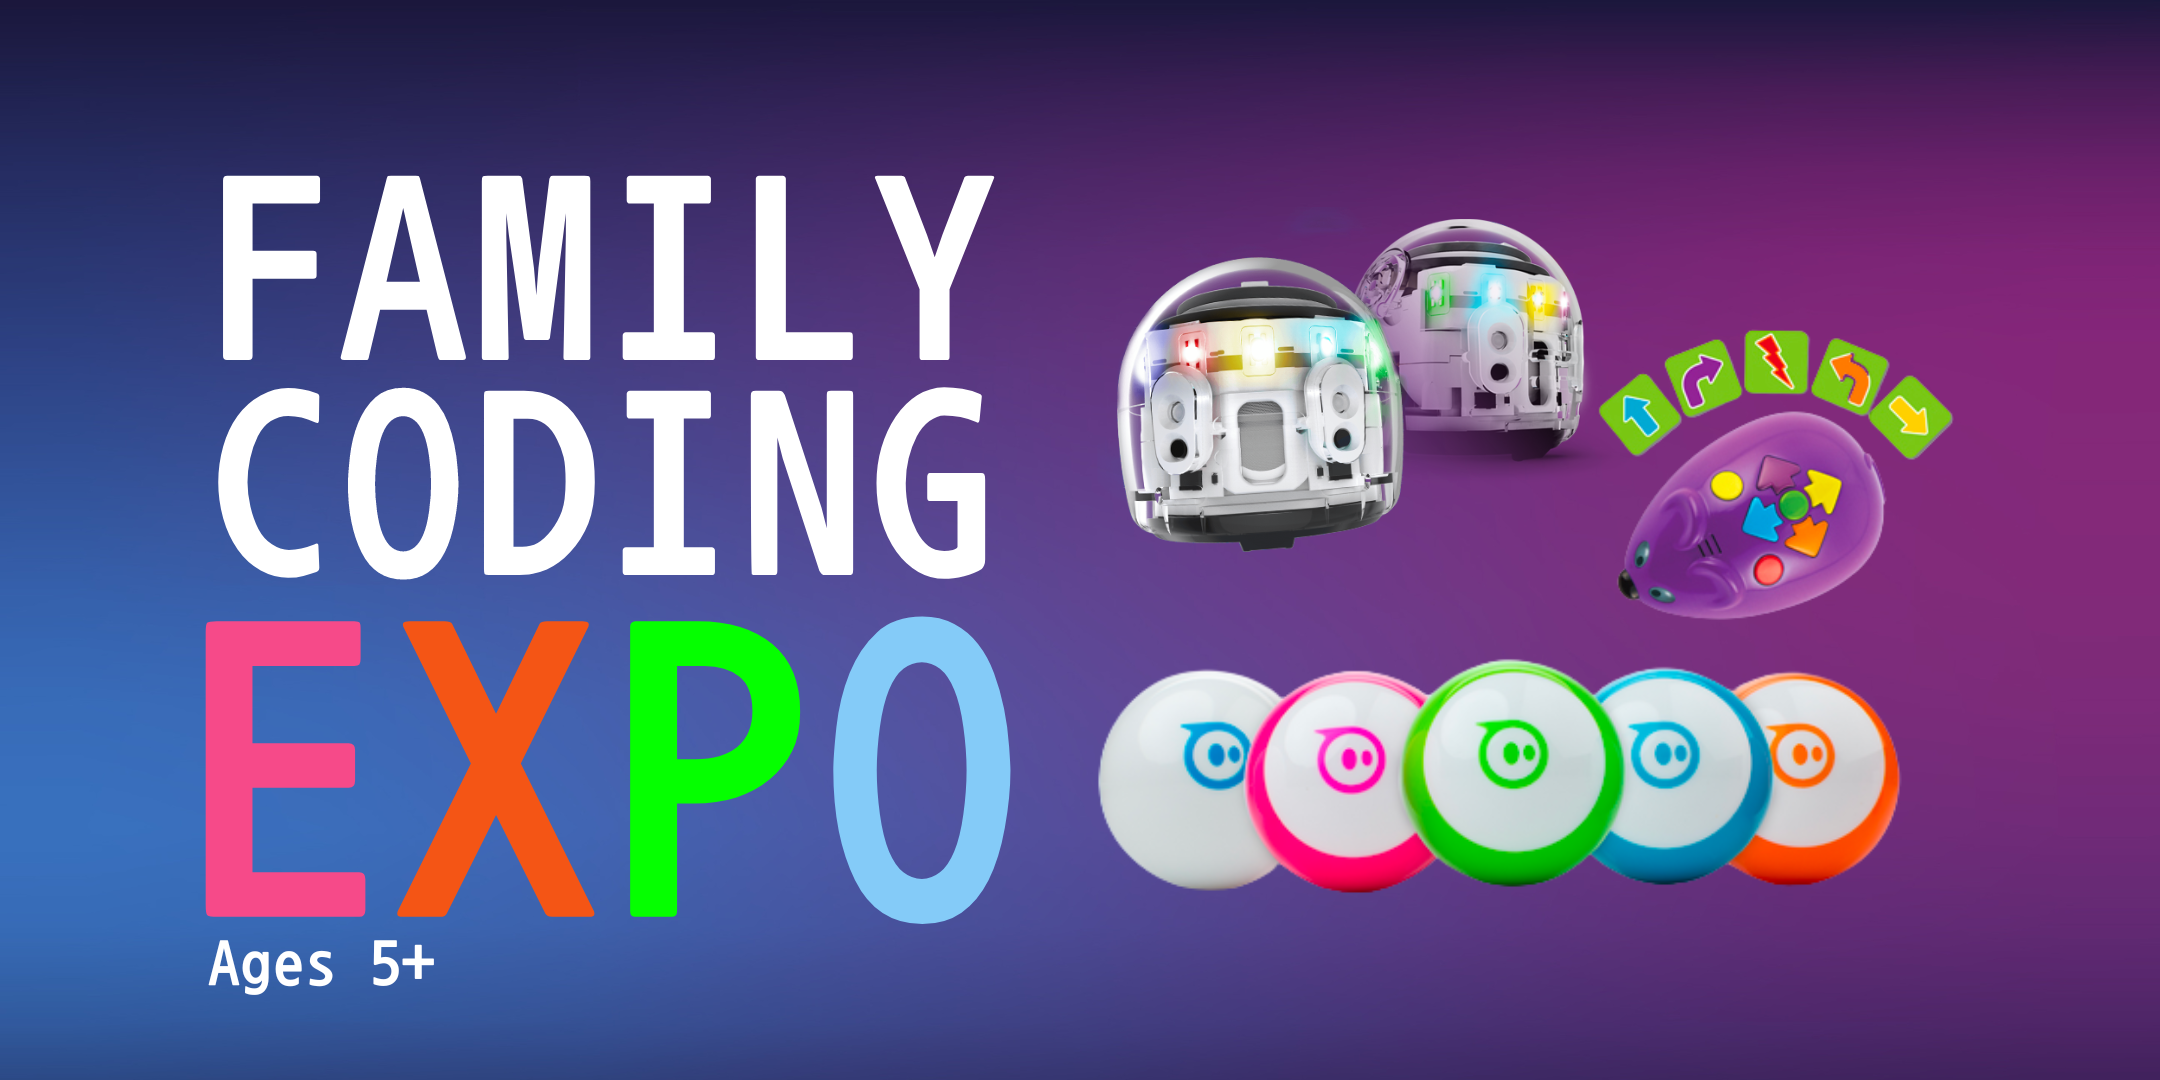 image of "Family Coding Expo"